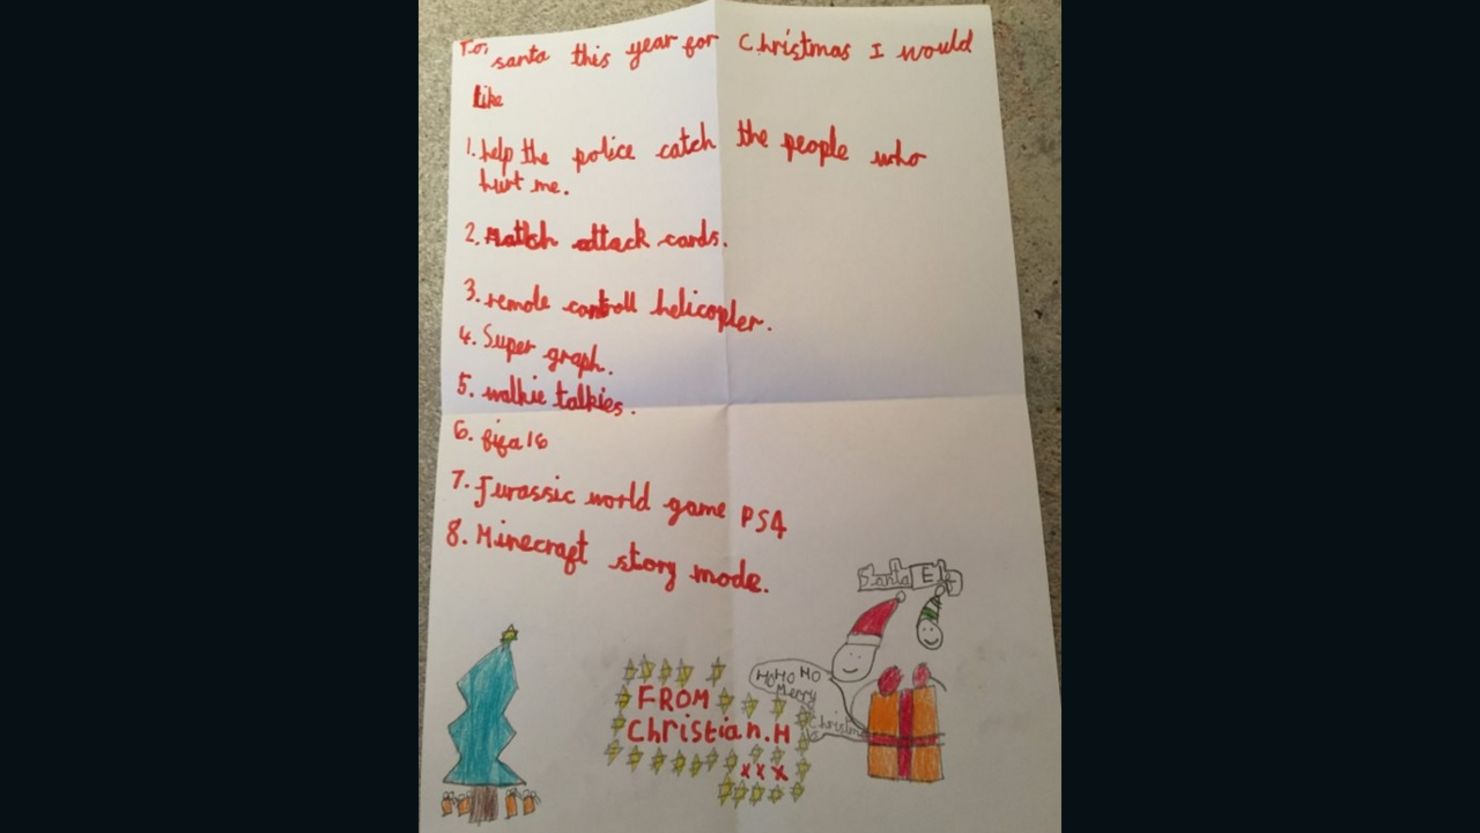 Christian Hickey's letter to Santa.